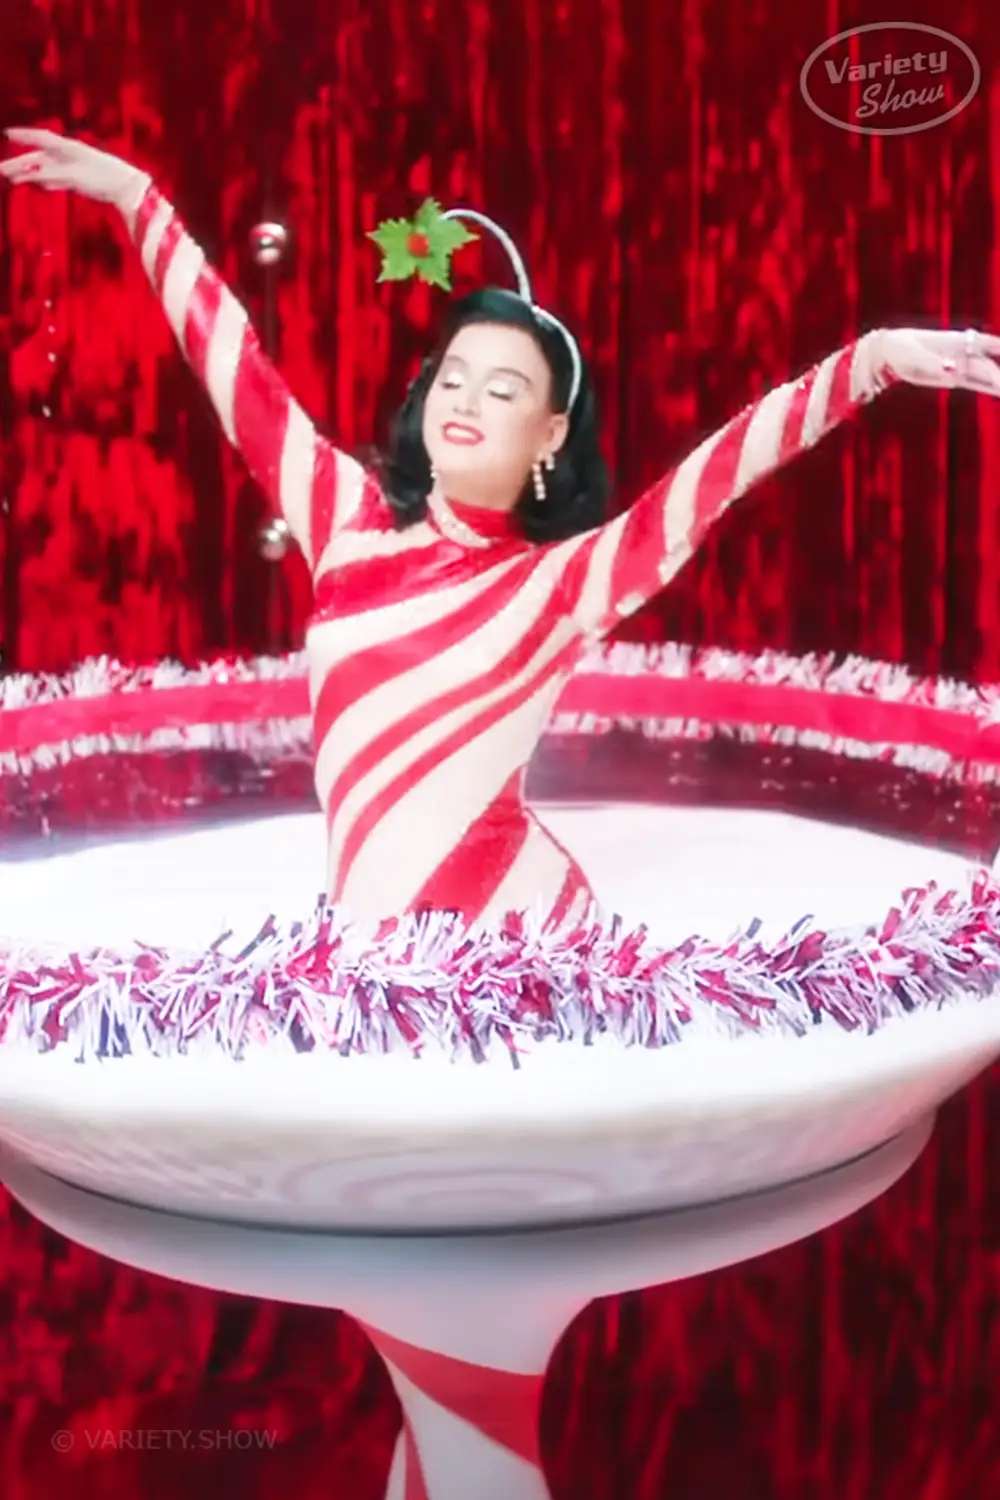 Katy Perry’s ‘Cozy Little Christmas’ wraps love in festive cheer ...